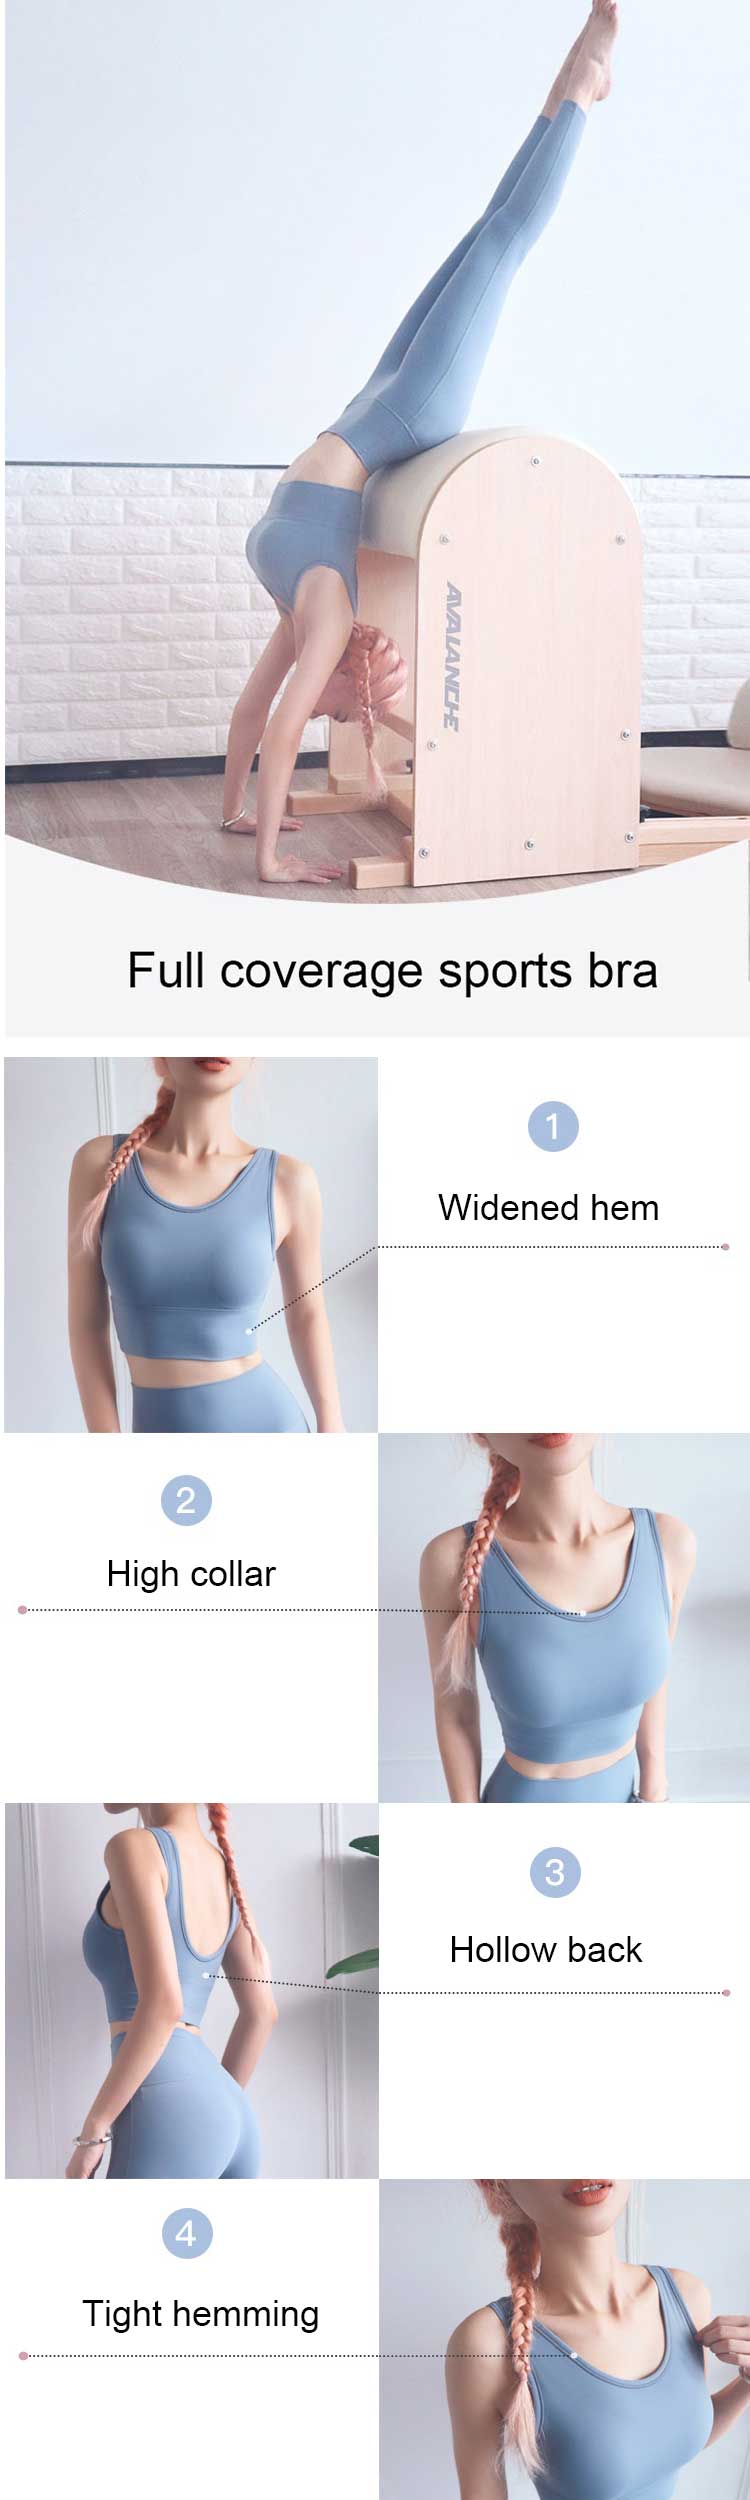 This-full-coverage-sports-bra-is-designed-with-stylish-mesh-stitching